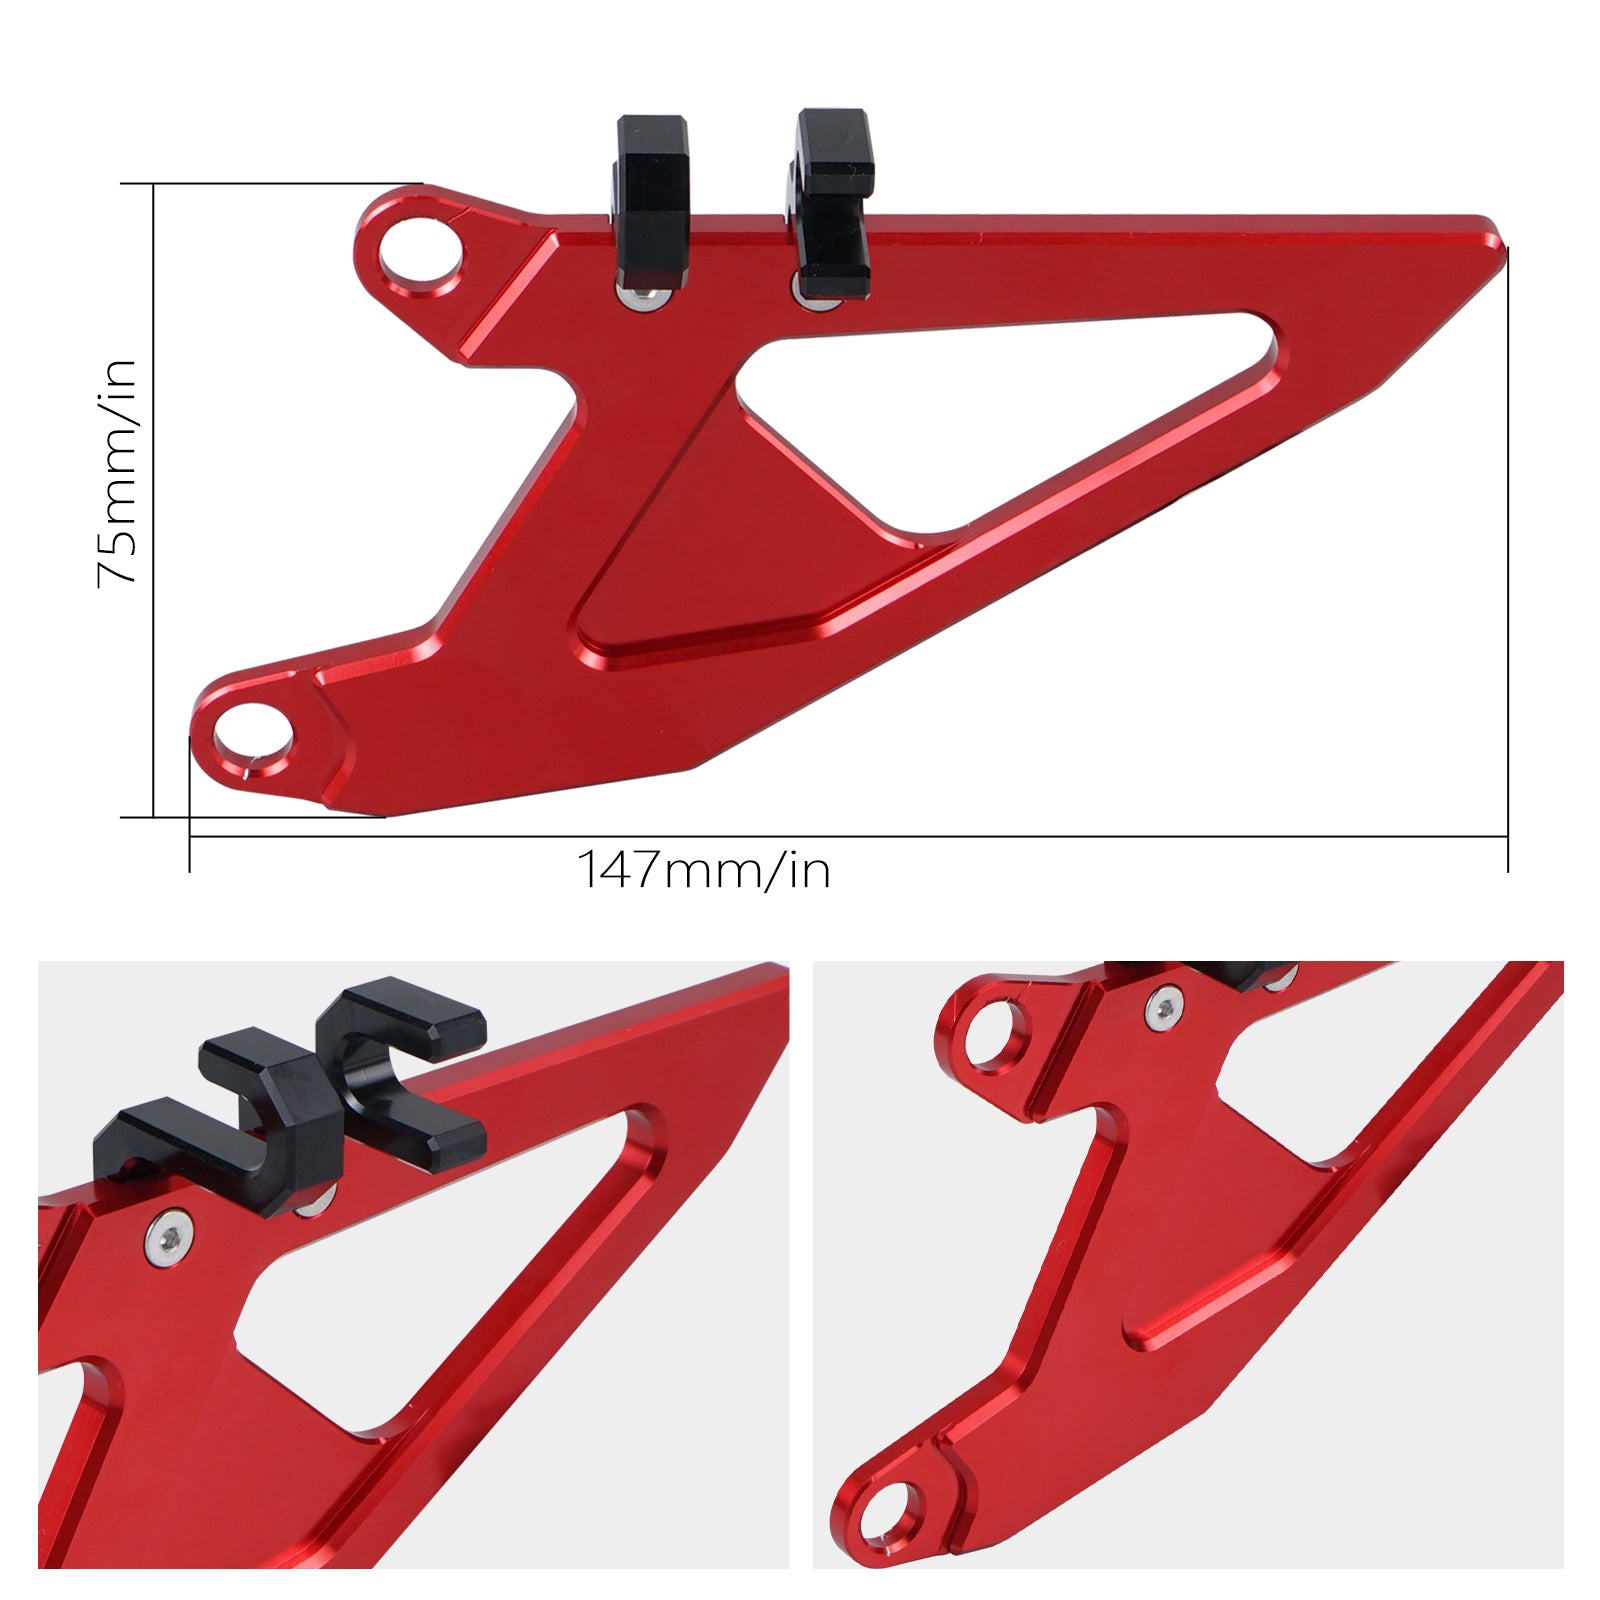 CNC Front Sprocket Guard Cover Protector For Honda CRF250R CRF450R